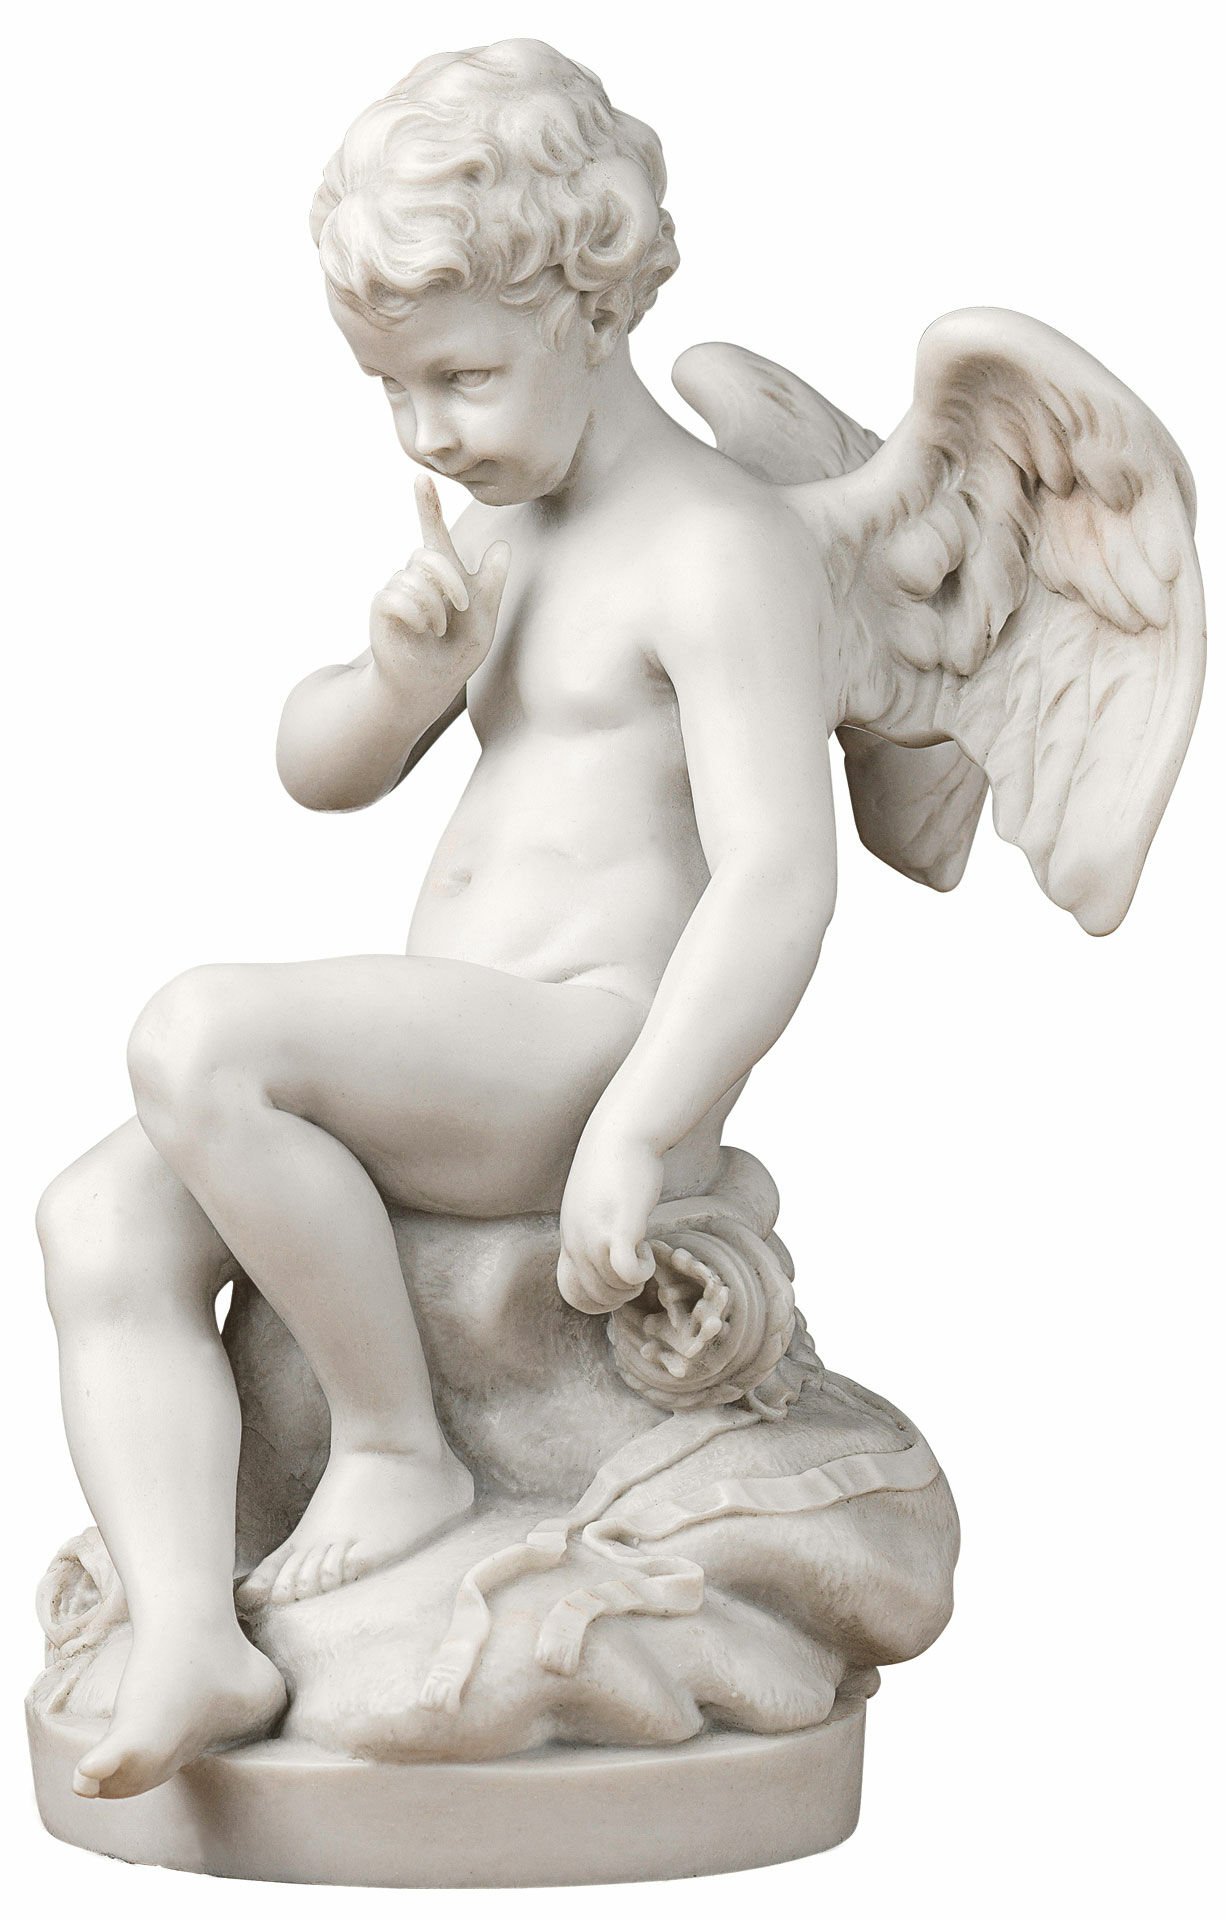 "The Menacing Cupid", 1757 (small sculpture) by Etienne-Maurice Falconet